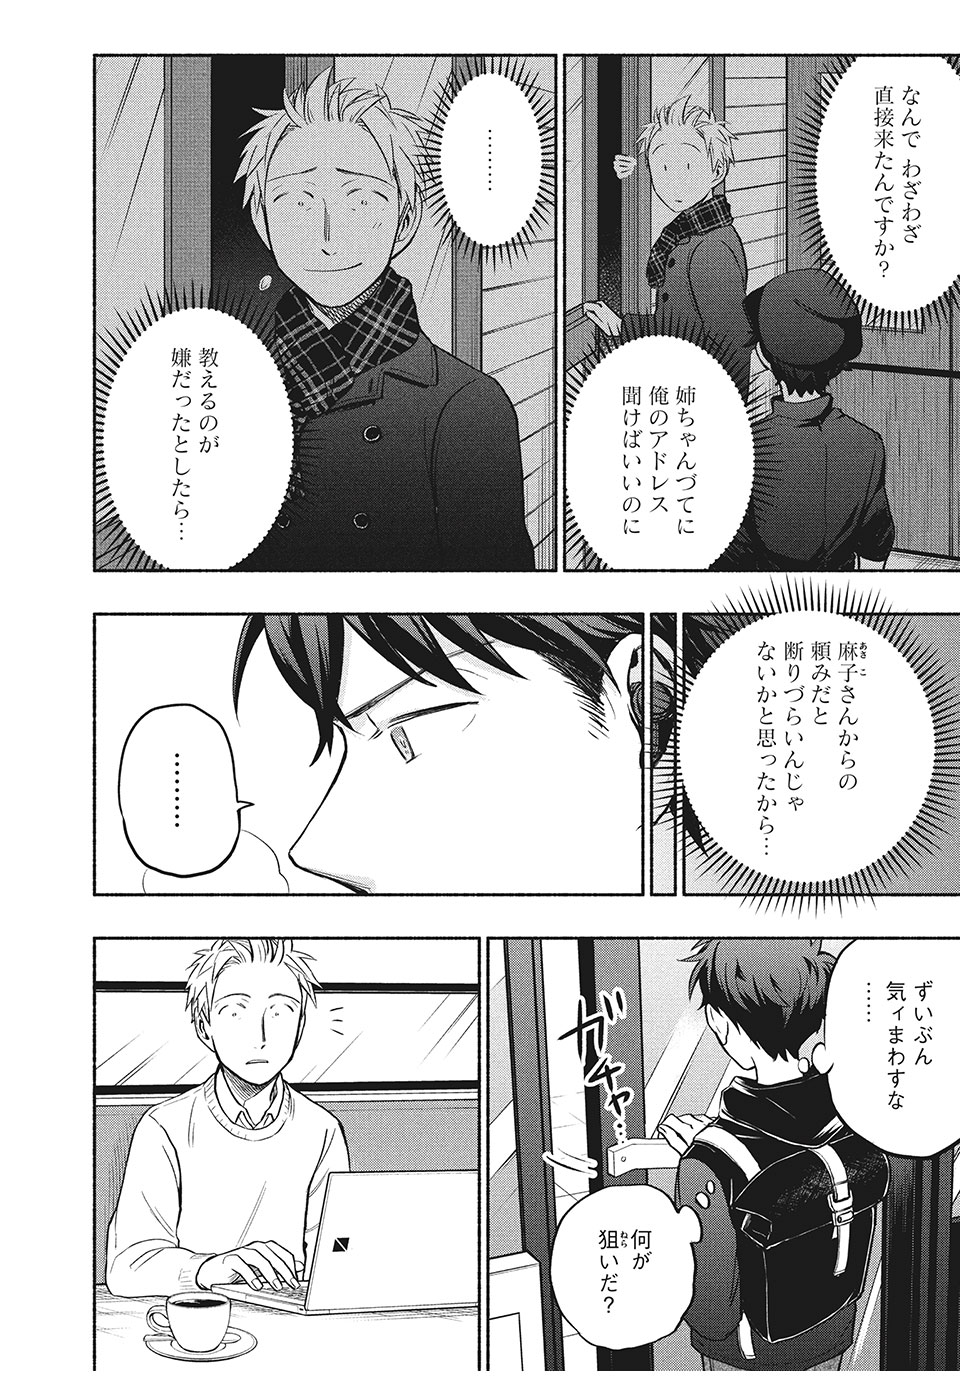 Ase to Sekken - Chapter 33 - Page 2